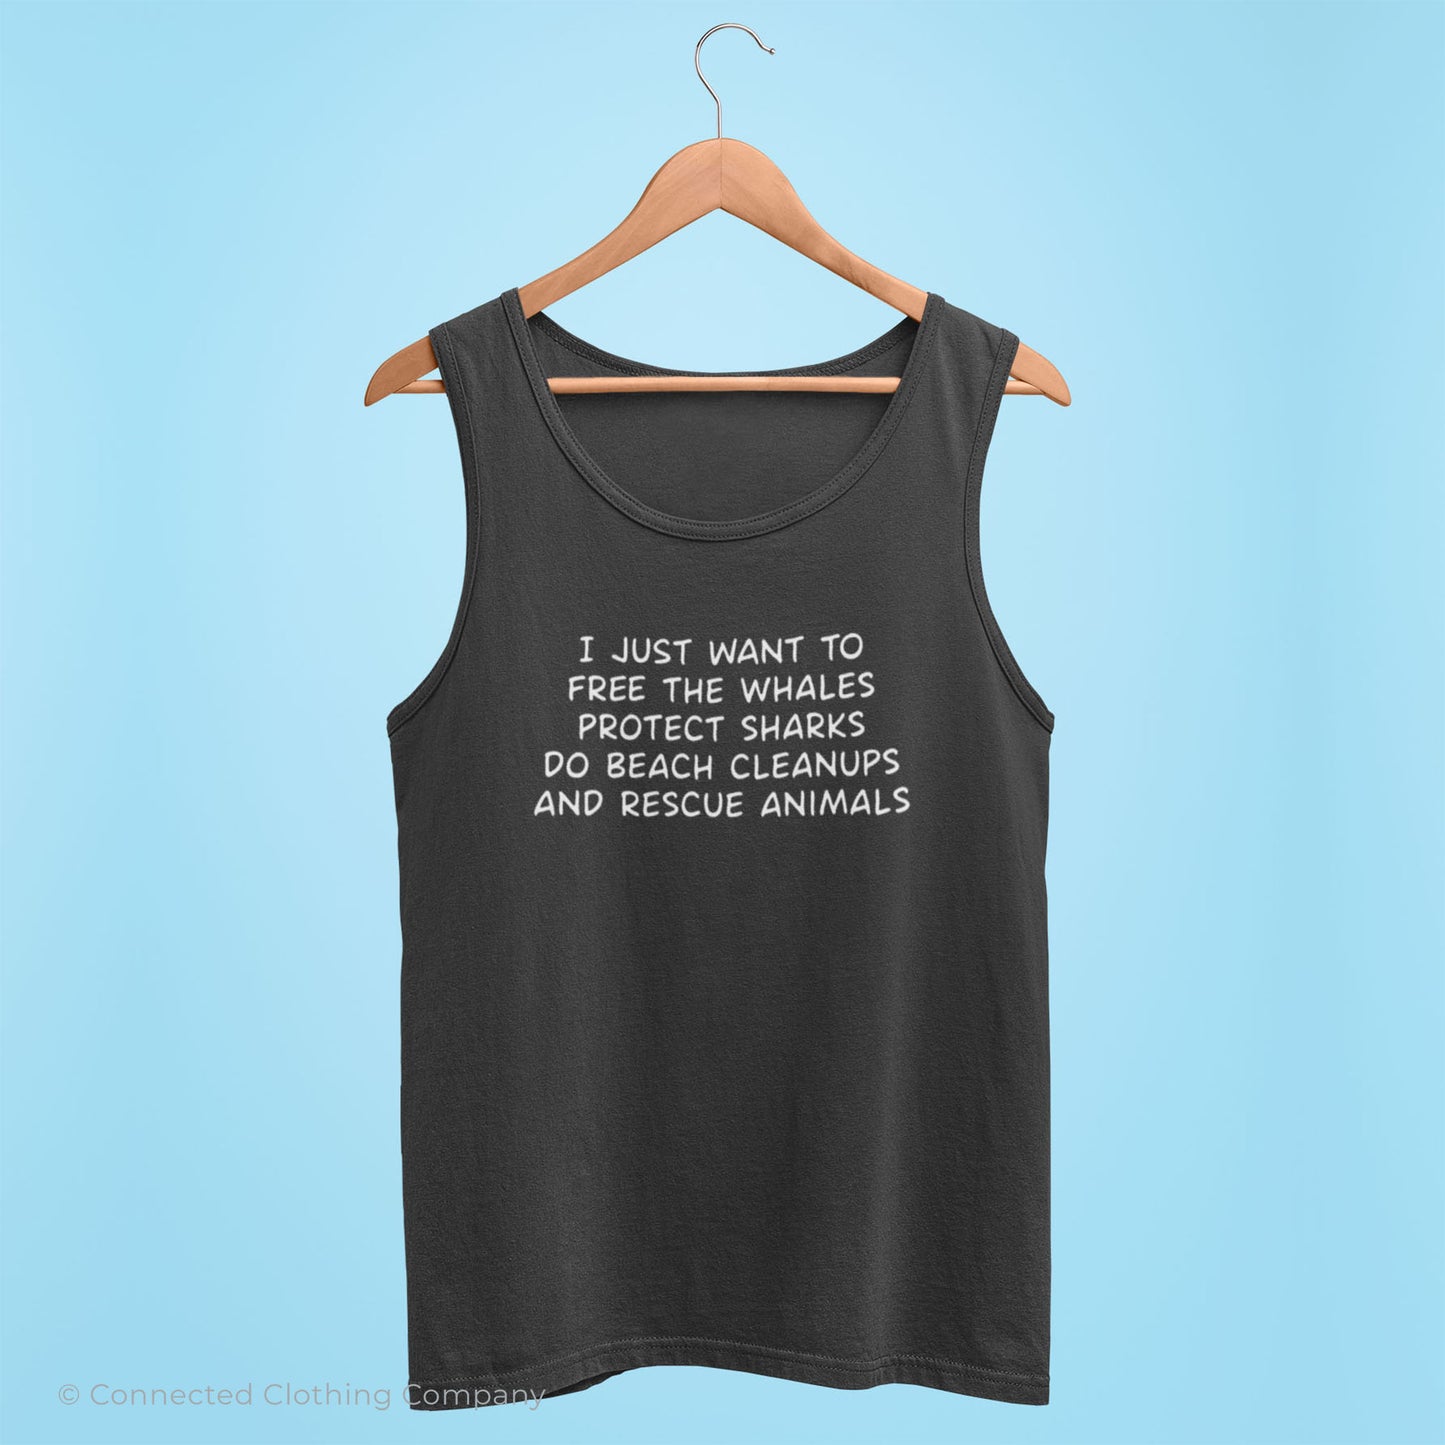 Asphalt I Just Want To Save The World Tank Top reads "I just want to free the whales, protect sharks, do beach cleanups, and rescue animals." - sweetsherriloudesigns - Ethically and Sustainably Made - 10% donated to Mission Blue ocean conservation